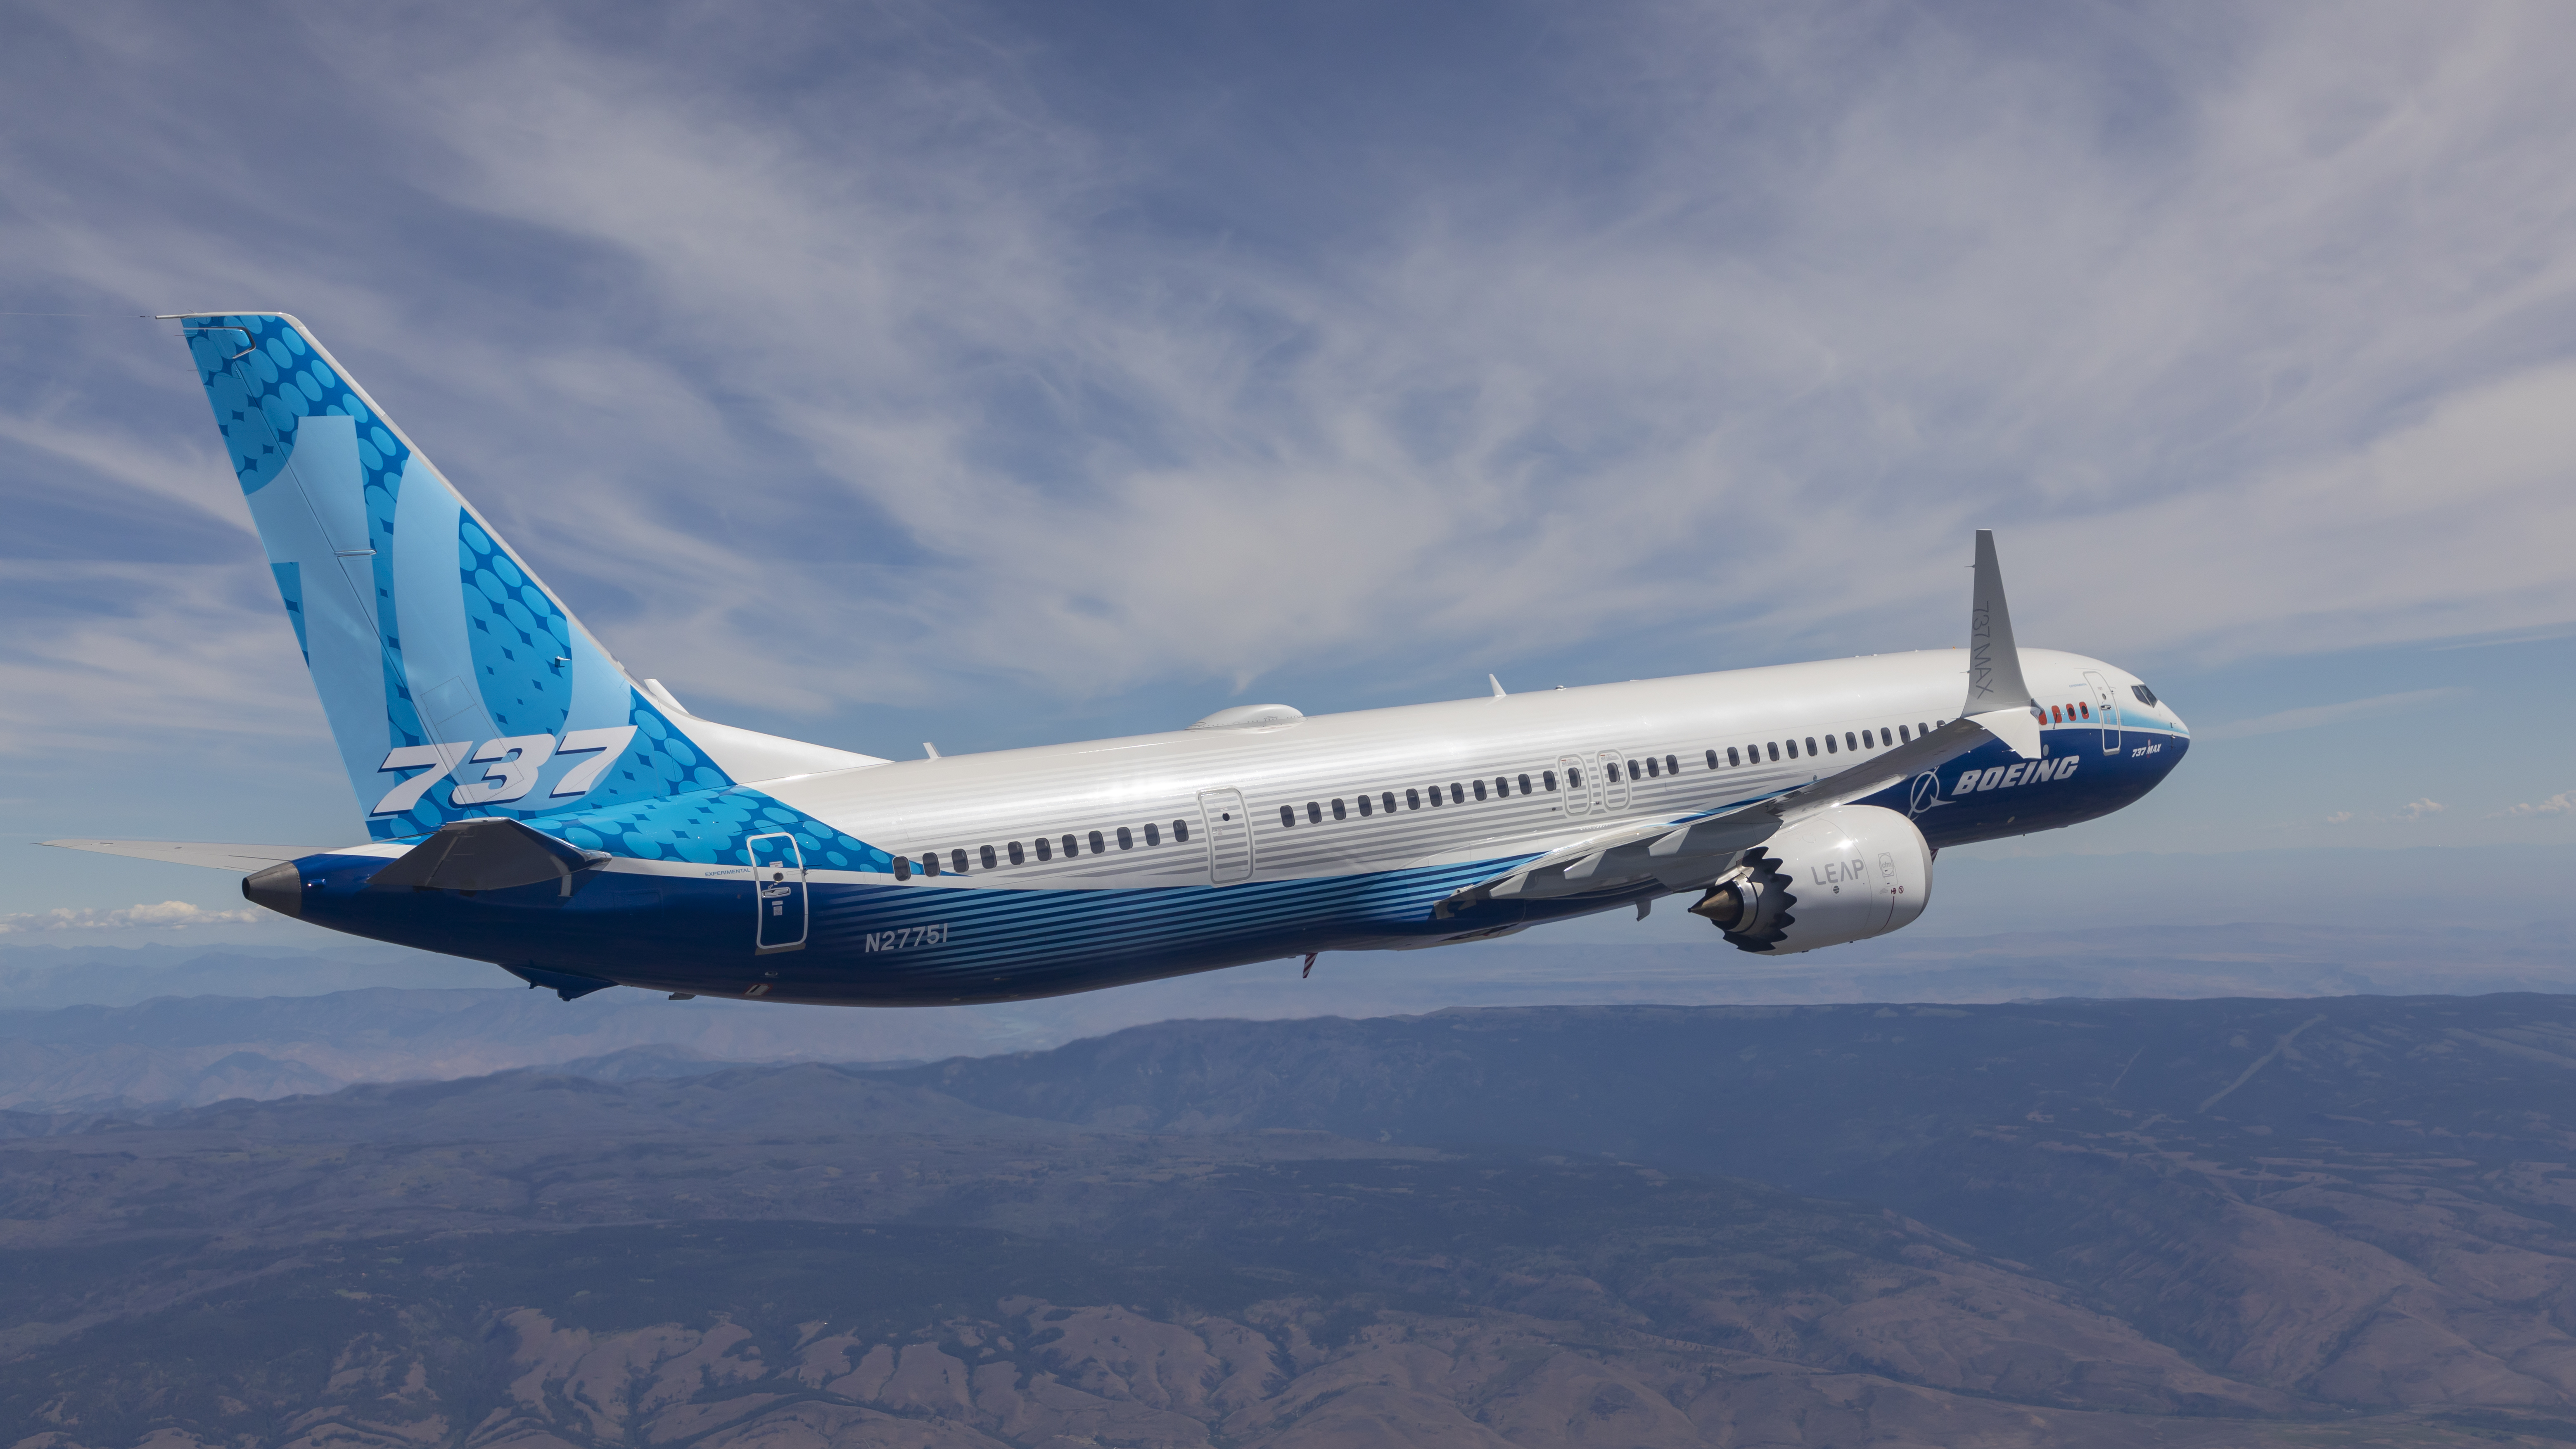 On Wednesday, Nov. 22 2023, the FAA granted the Boeing 737-10 Type Inspection Authorization. This is a significant milestone as we work to get the airplane certified to enter passenger service.  Watch the 737-10 begin certification flight testing at Boeing Field in Seattle.